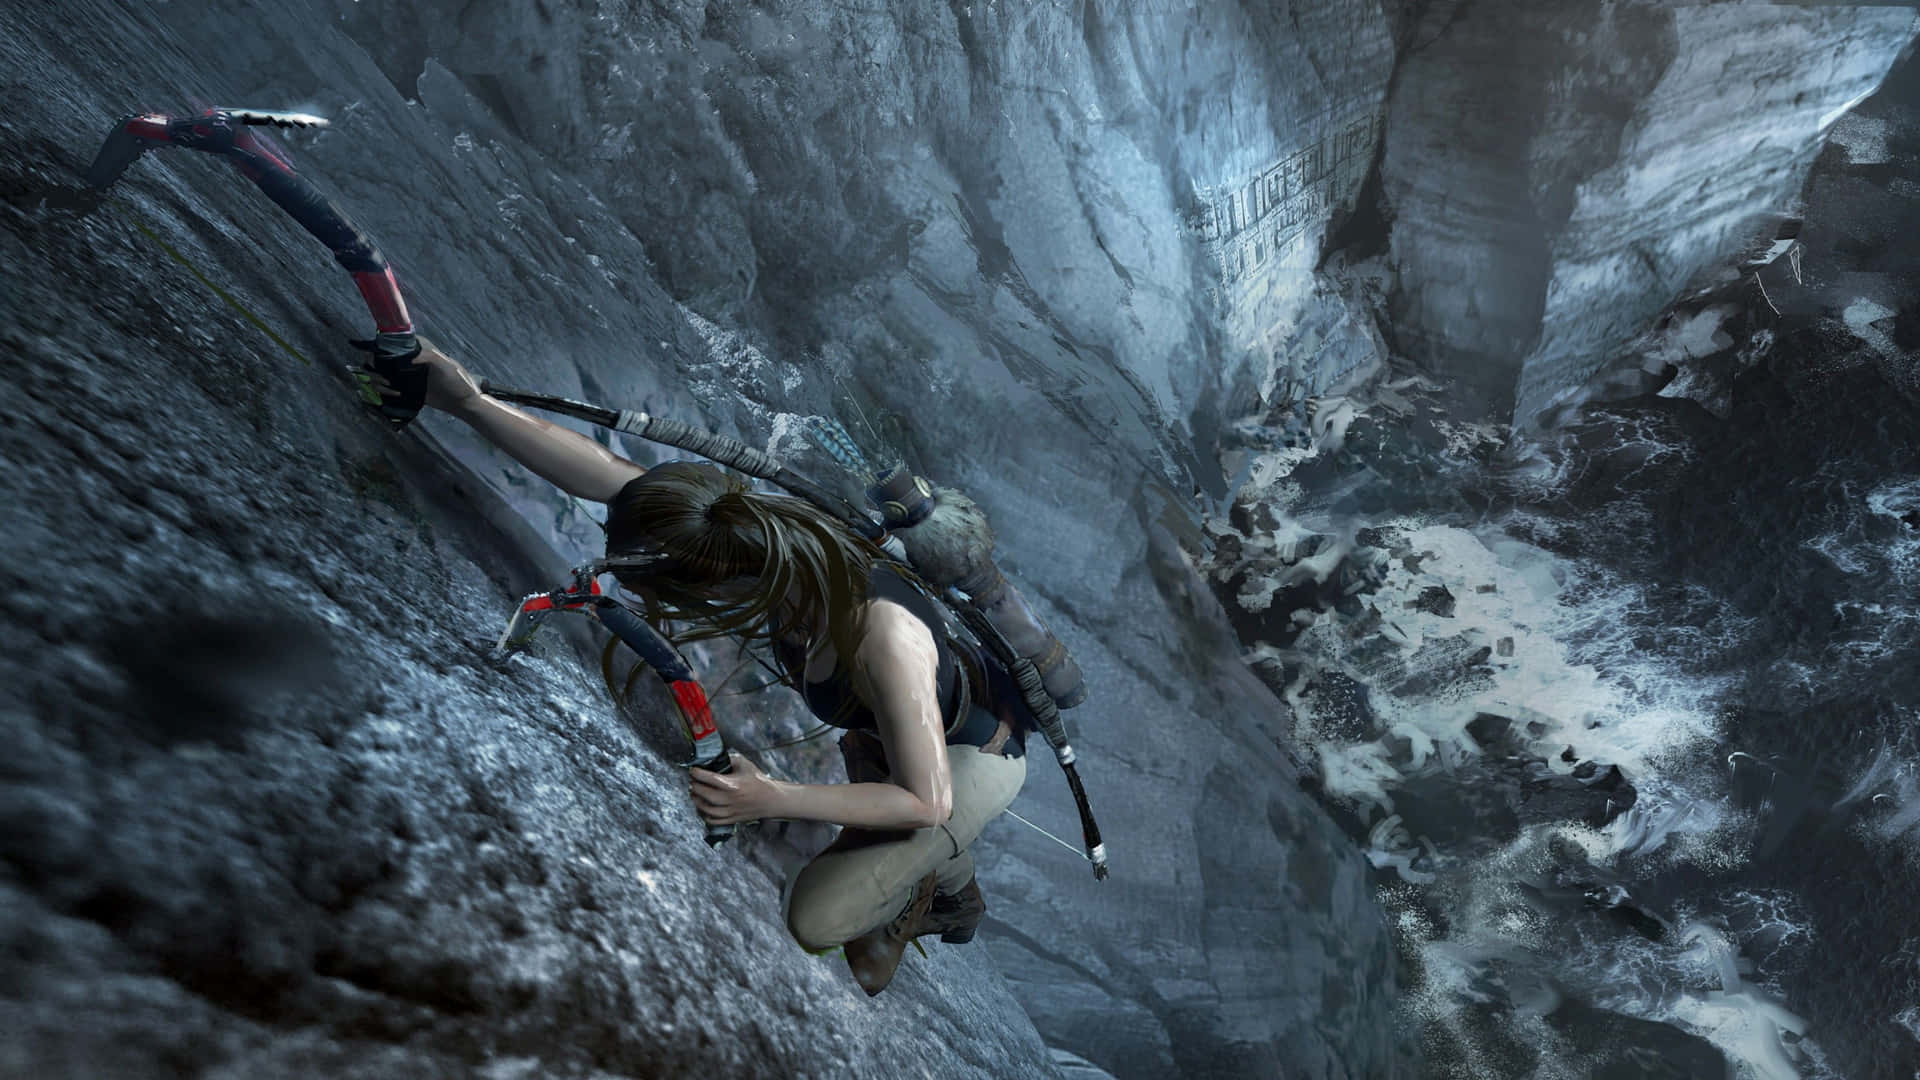 A Woman Is Climbing A Cliff With A Sword